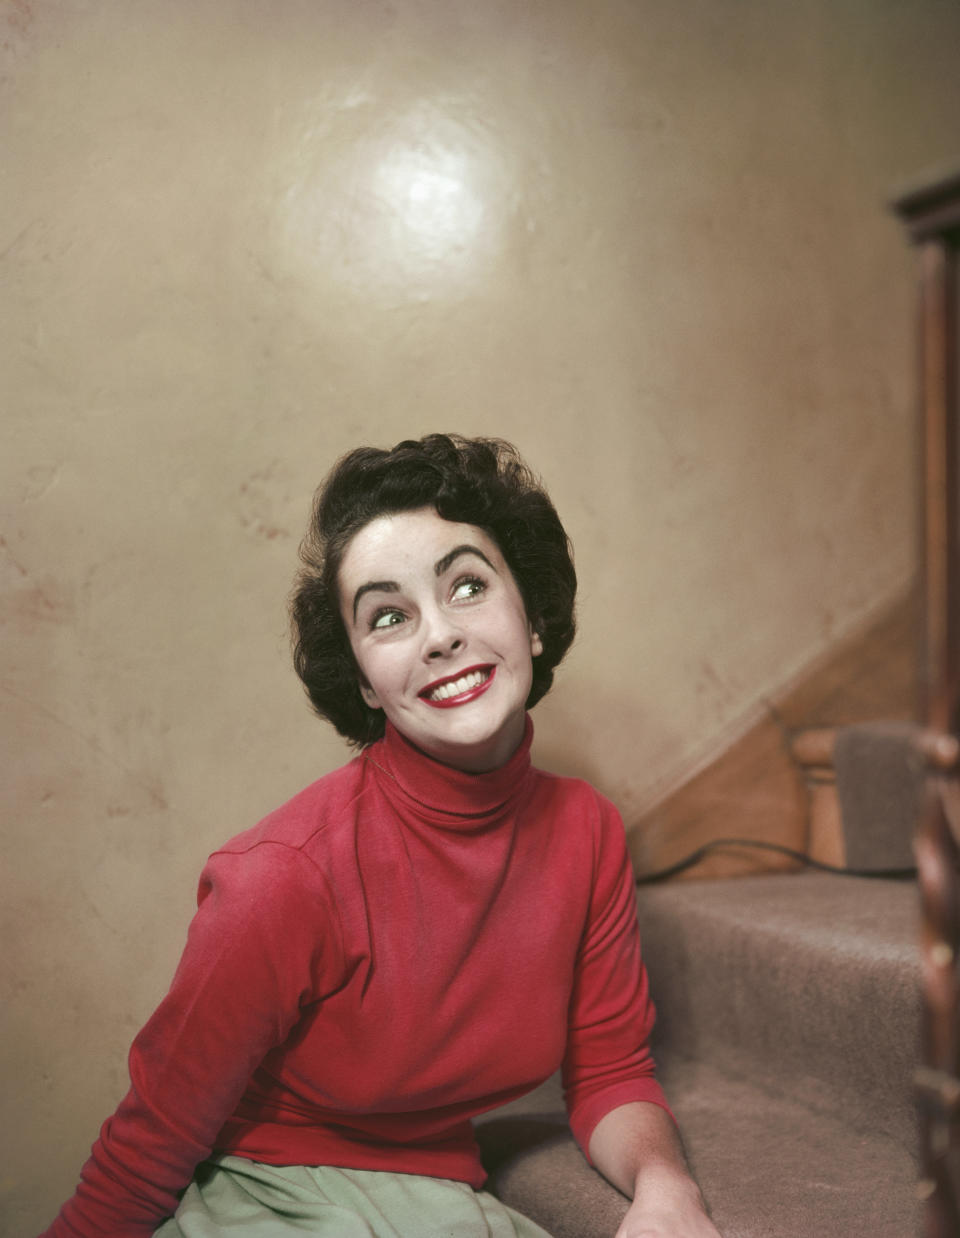 The actress offers a big smile&nbsp;on a stairway in a red turtleneck, sometime in the '50s.